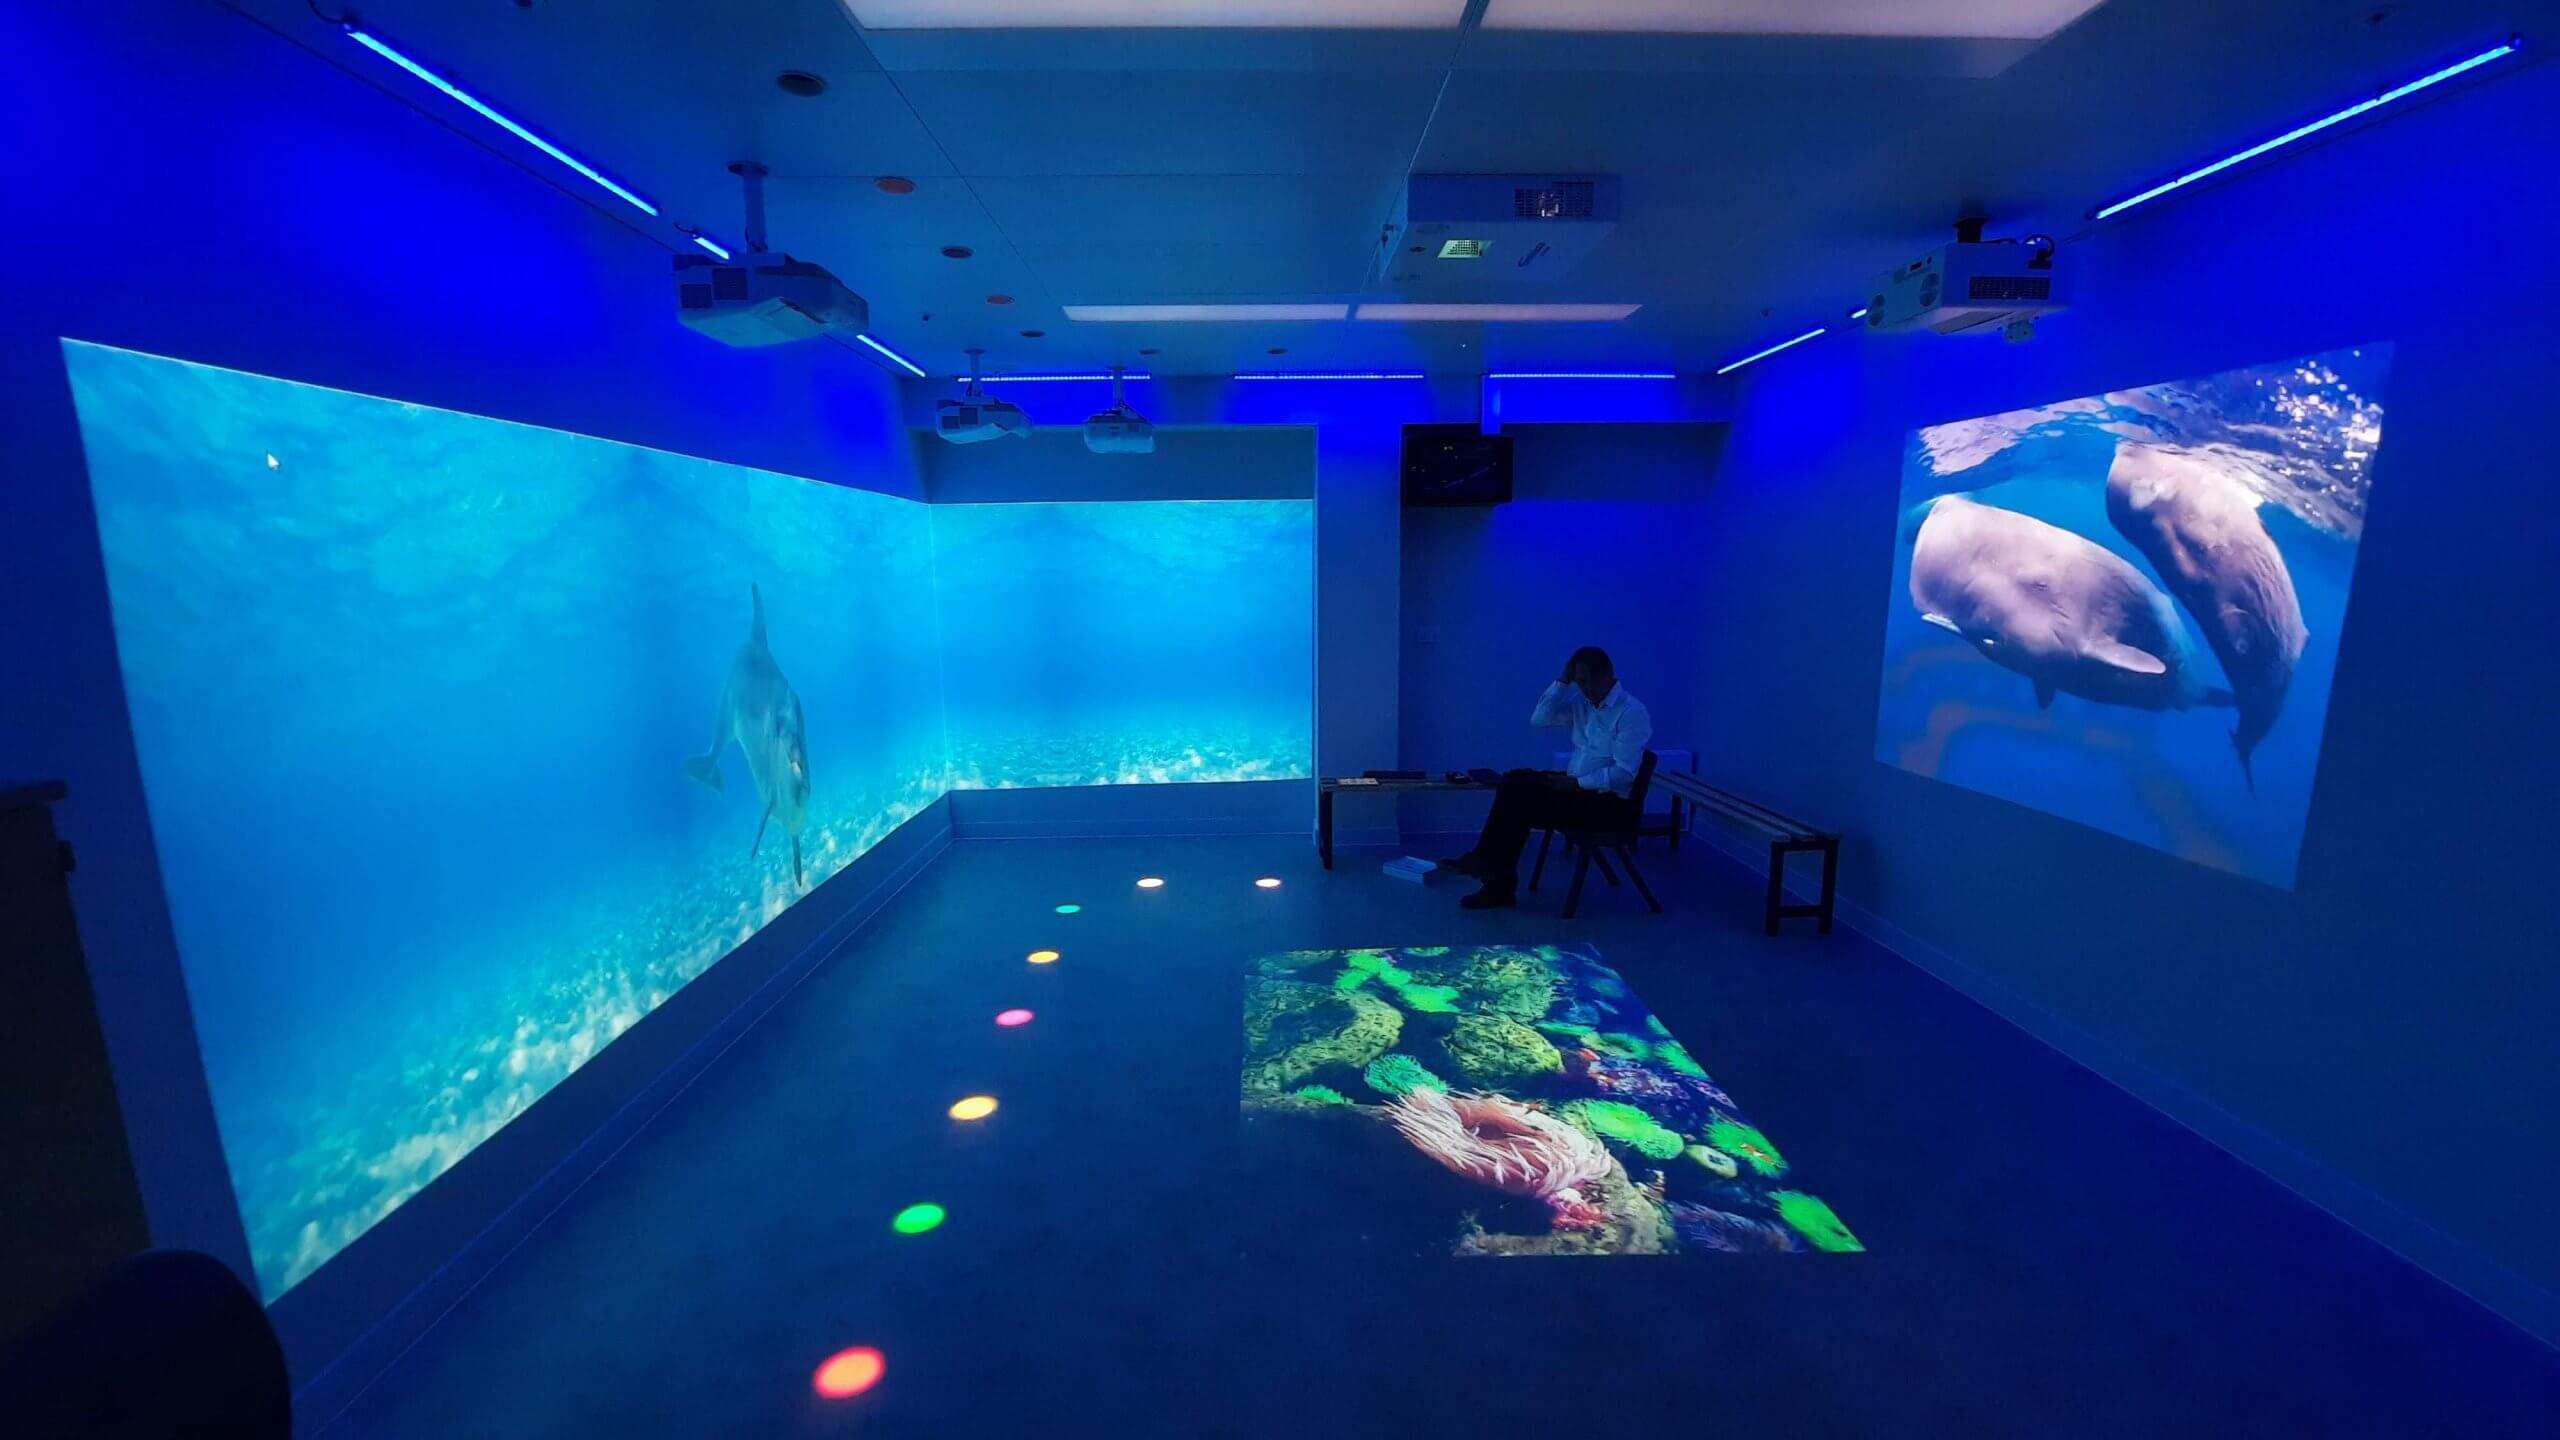 Immersive Rooms: Themes That Transport You To Another World